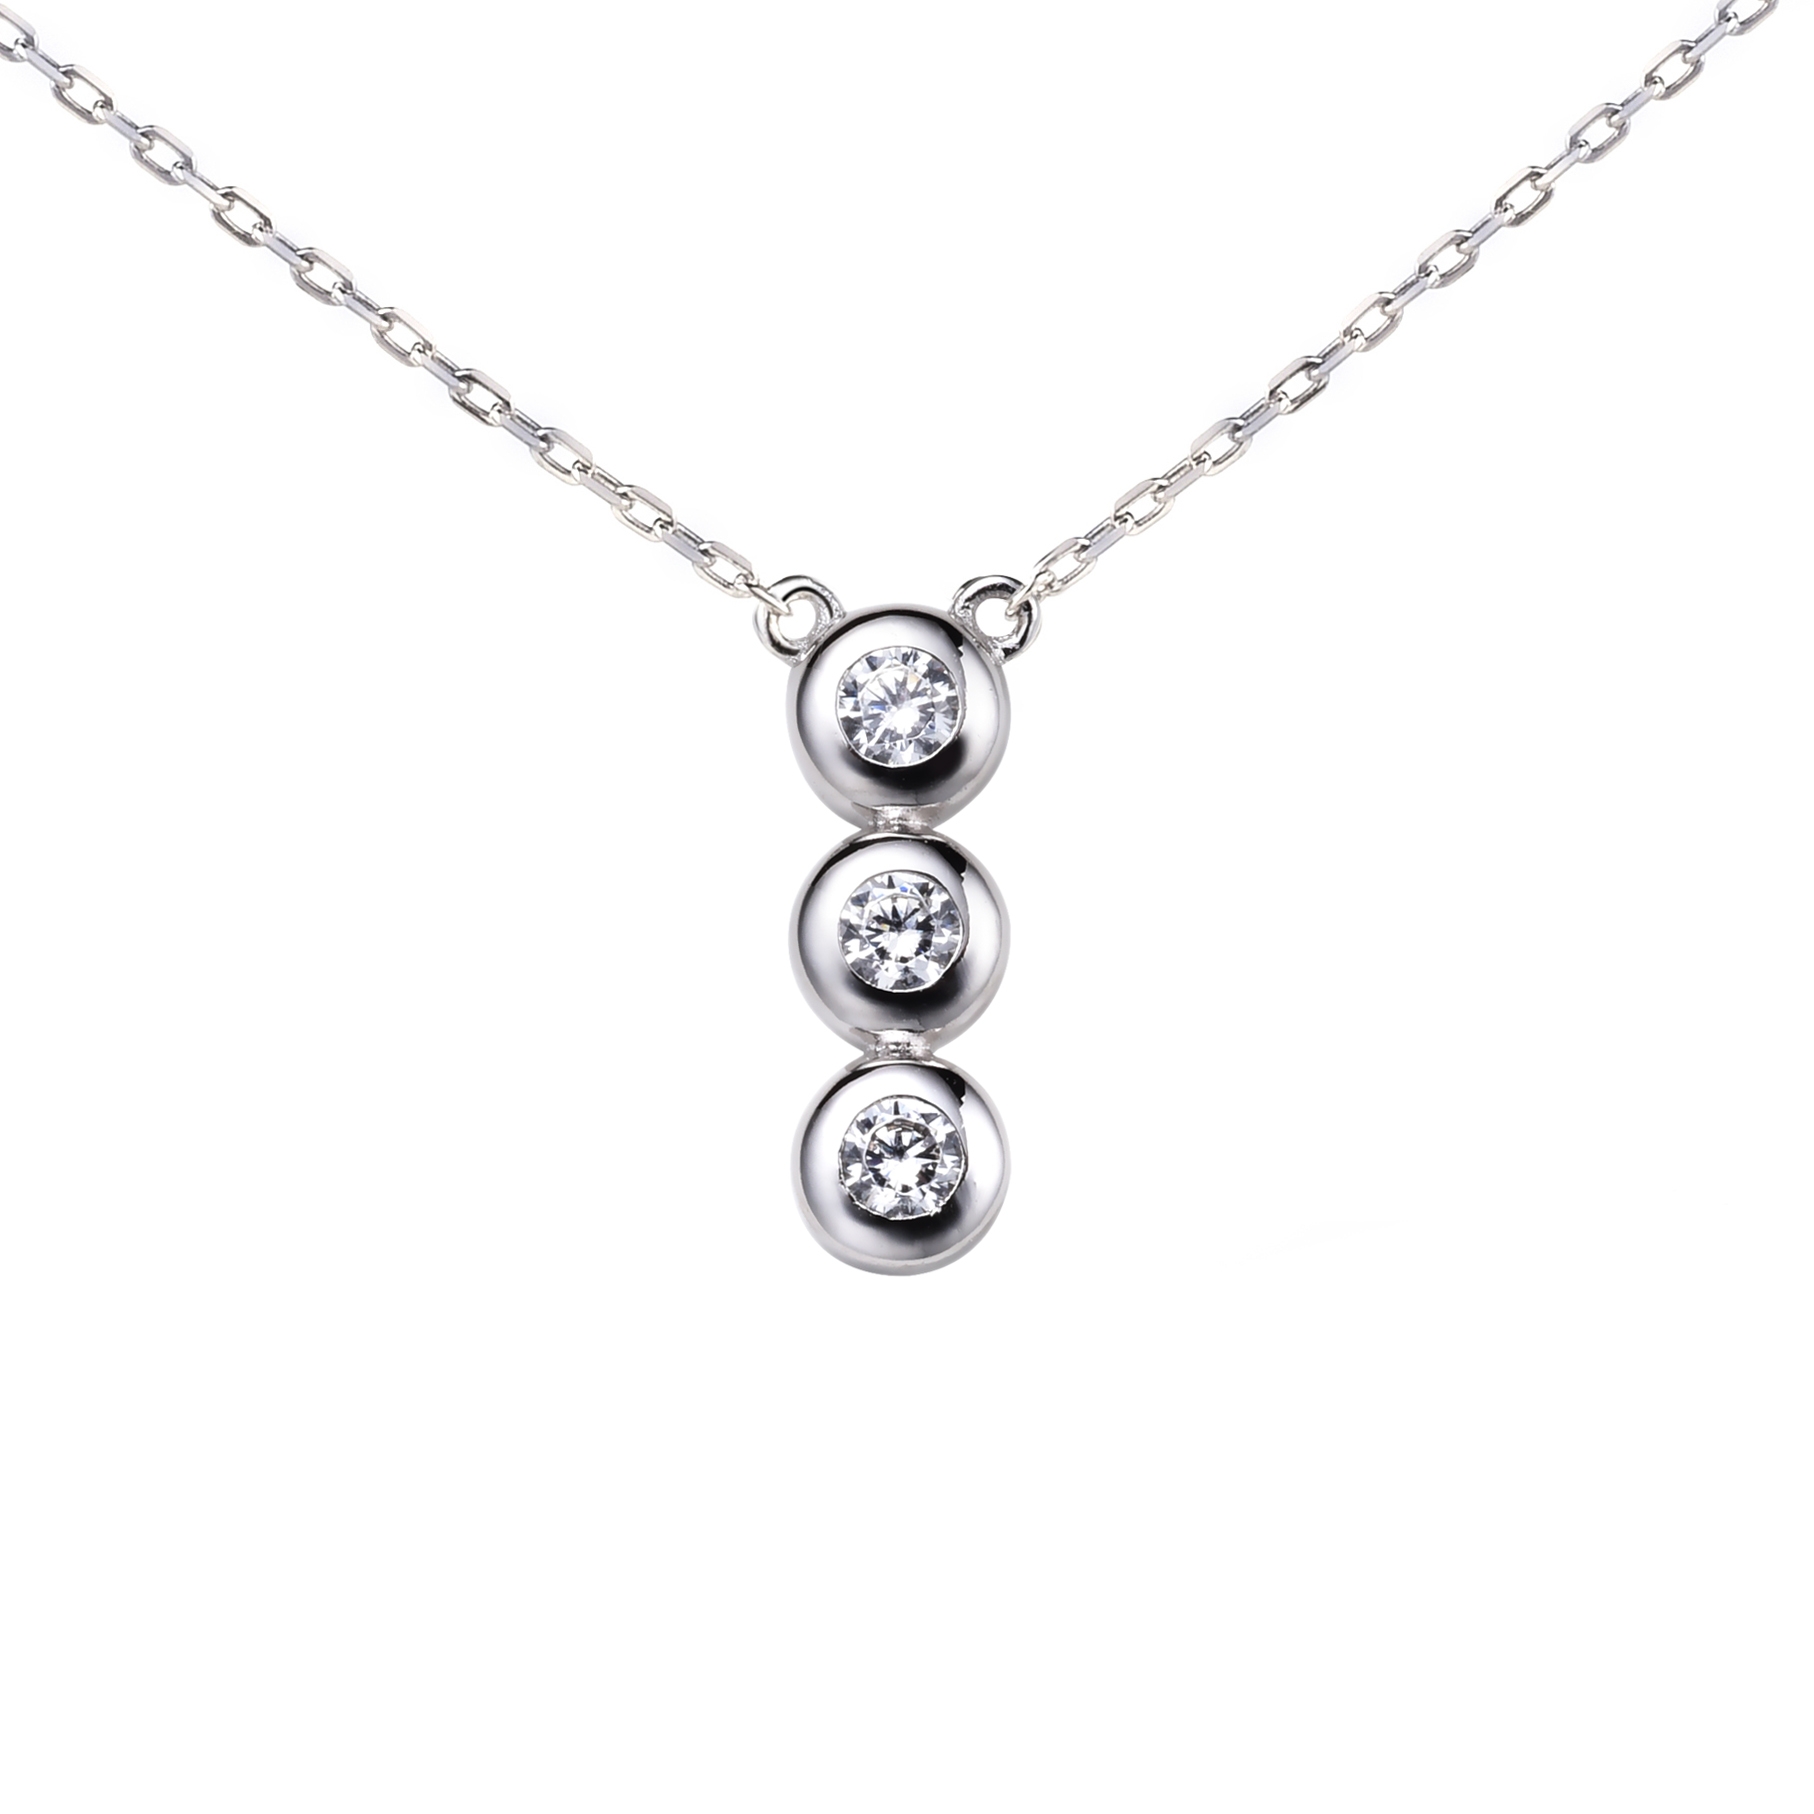 ZINZI Sterling Silver Necklace Pendant Round with White Zirconias 45cm ZIC1443